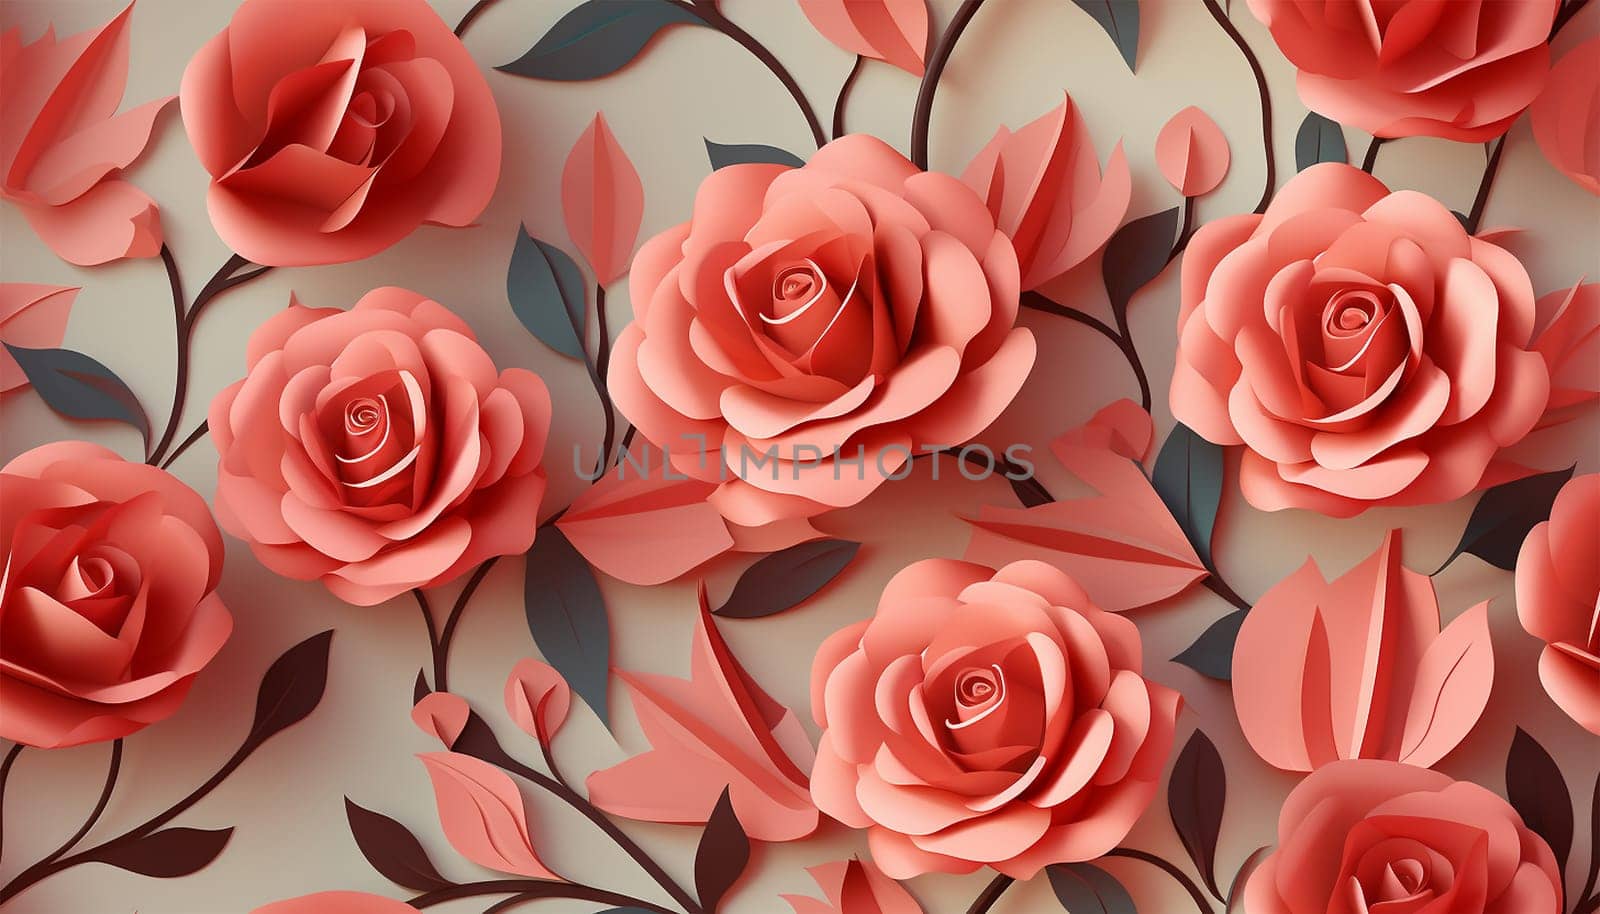 Pastel colored rose pattern background. Seamless pattern floral beautiful pink pastel Rose flowers vintage abstract background.pink illustration hand drawing dry watercolor.for fabric textile design or Product packaging by Annebel146